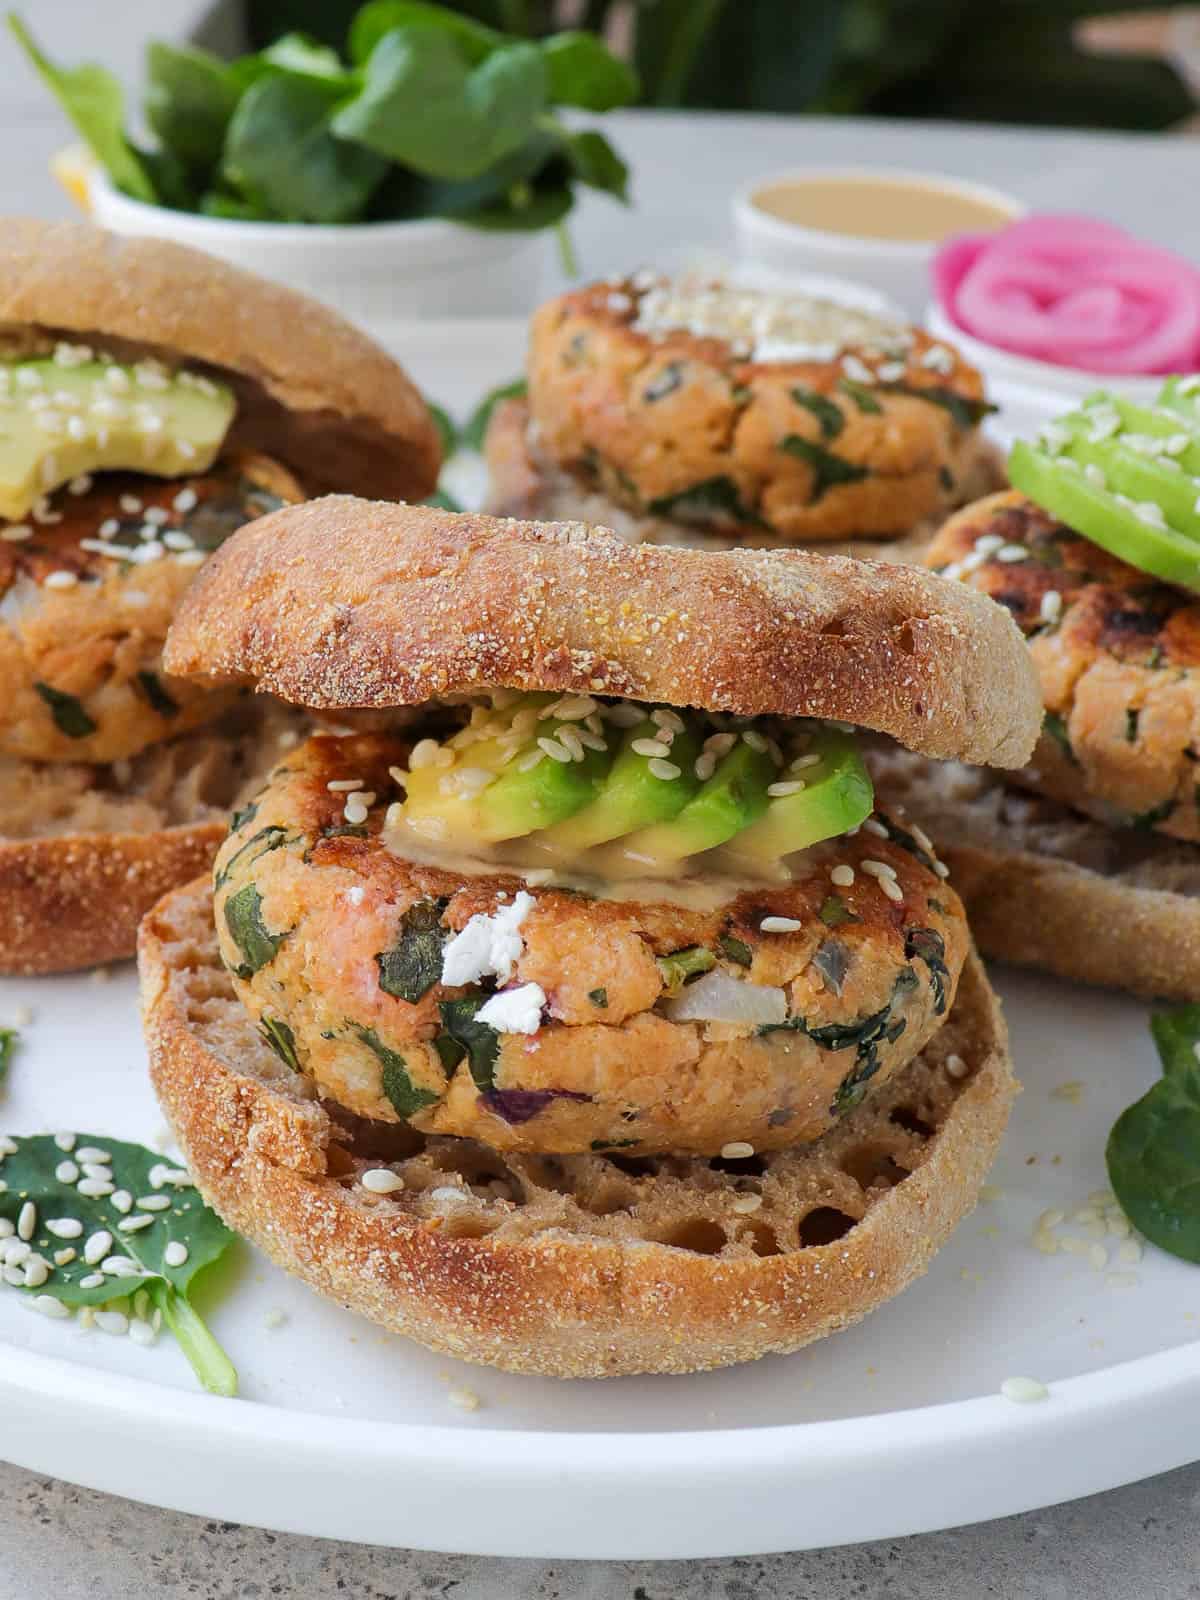 Side view of salmon burger in English muffin topped with avocado and sesame seeds.